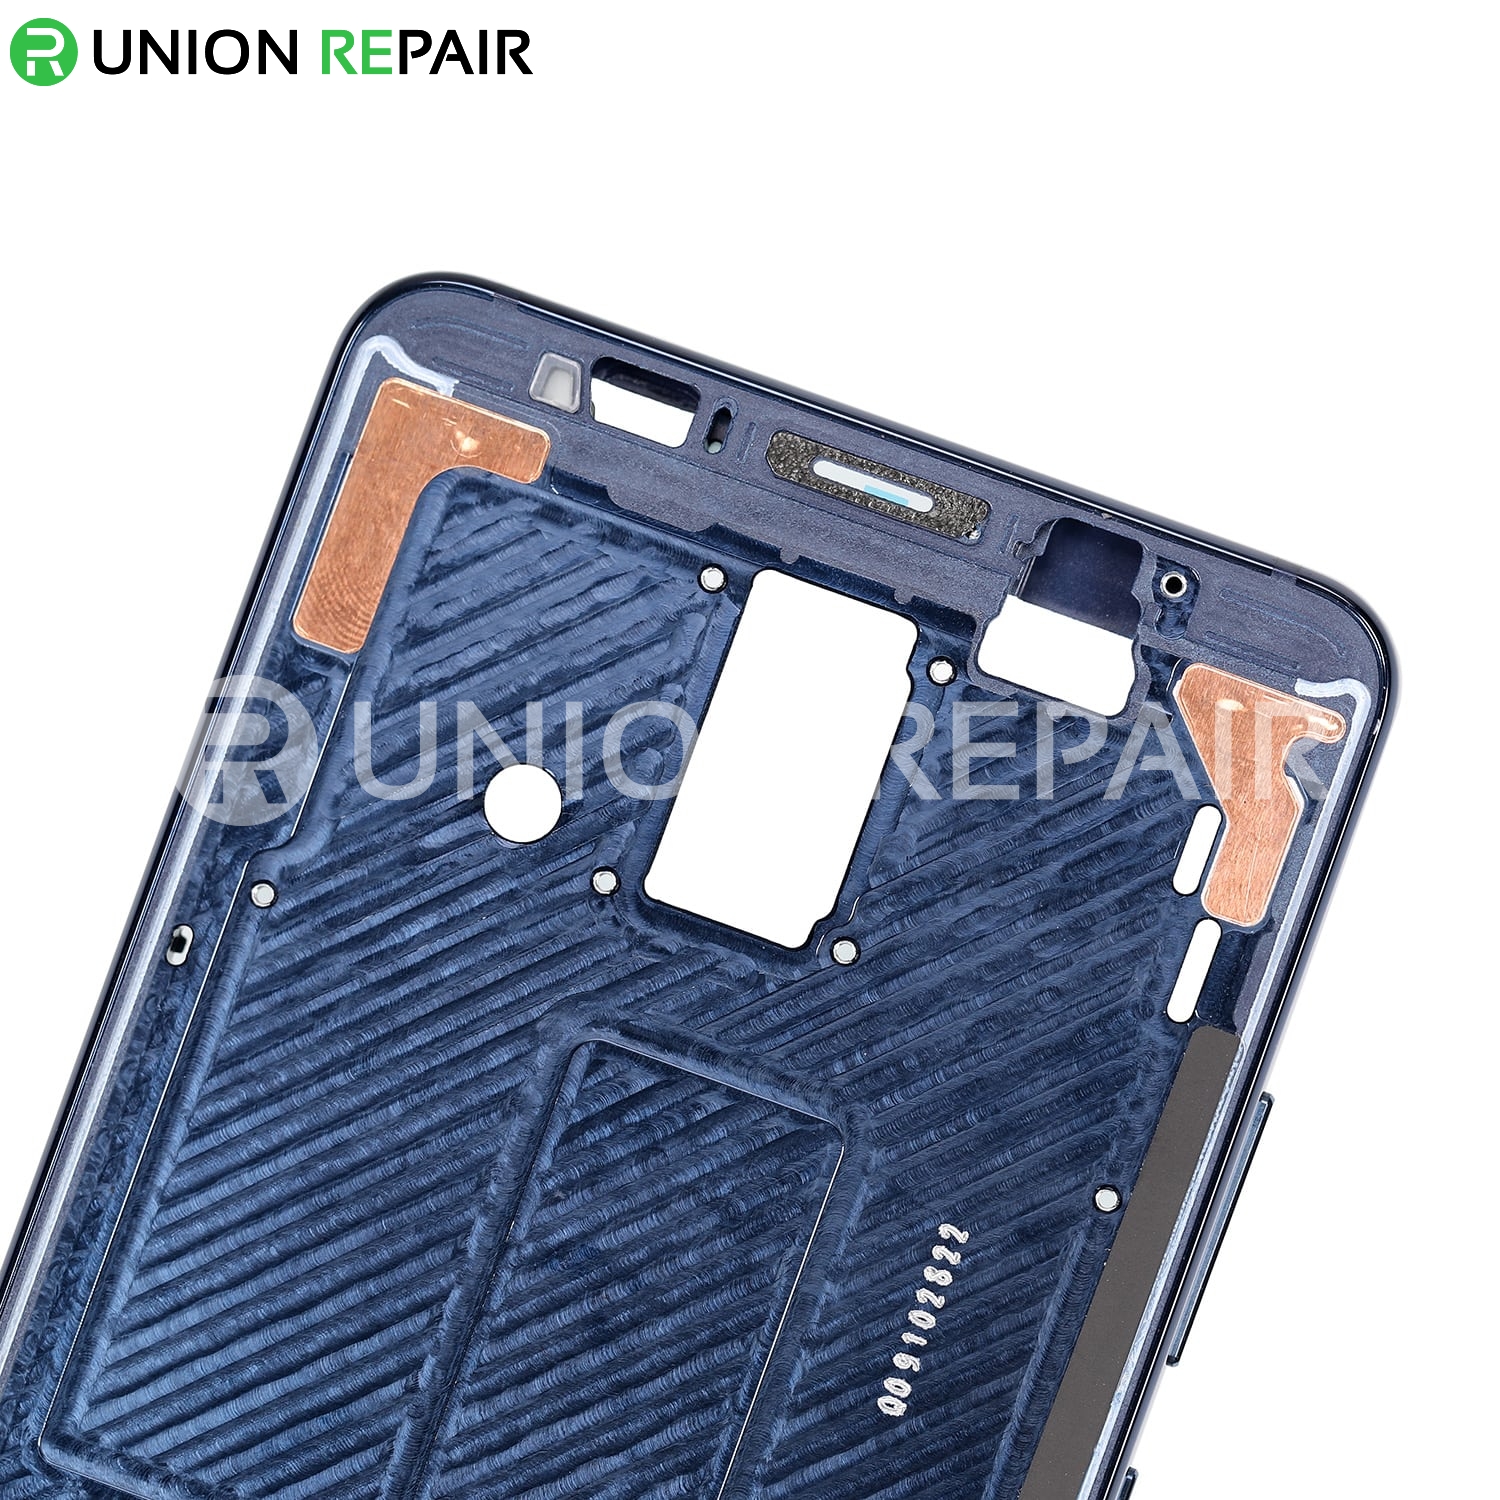 Replacement for Huawei Mate 10 Pro Front Housing LCD Frame Bezel Plate - Midnight Blue